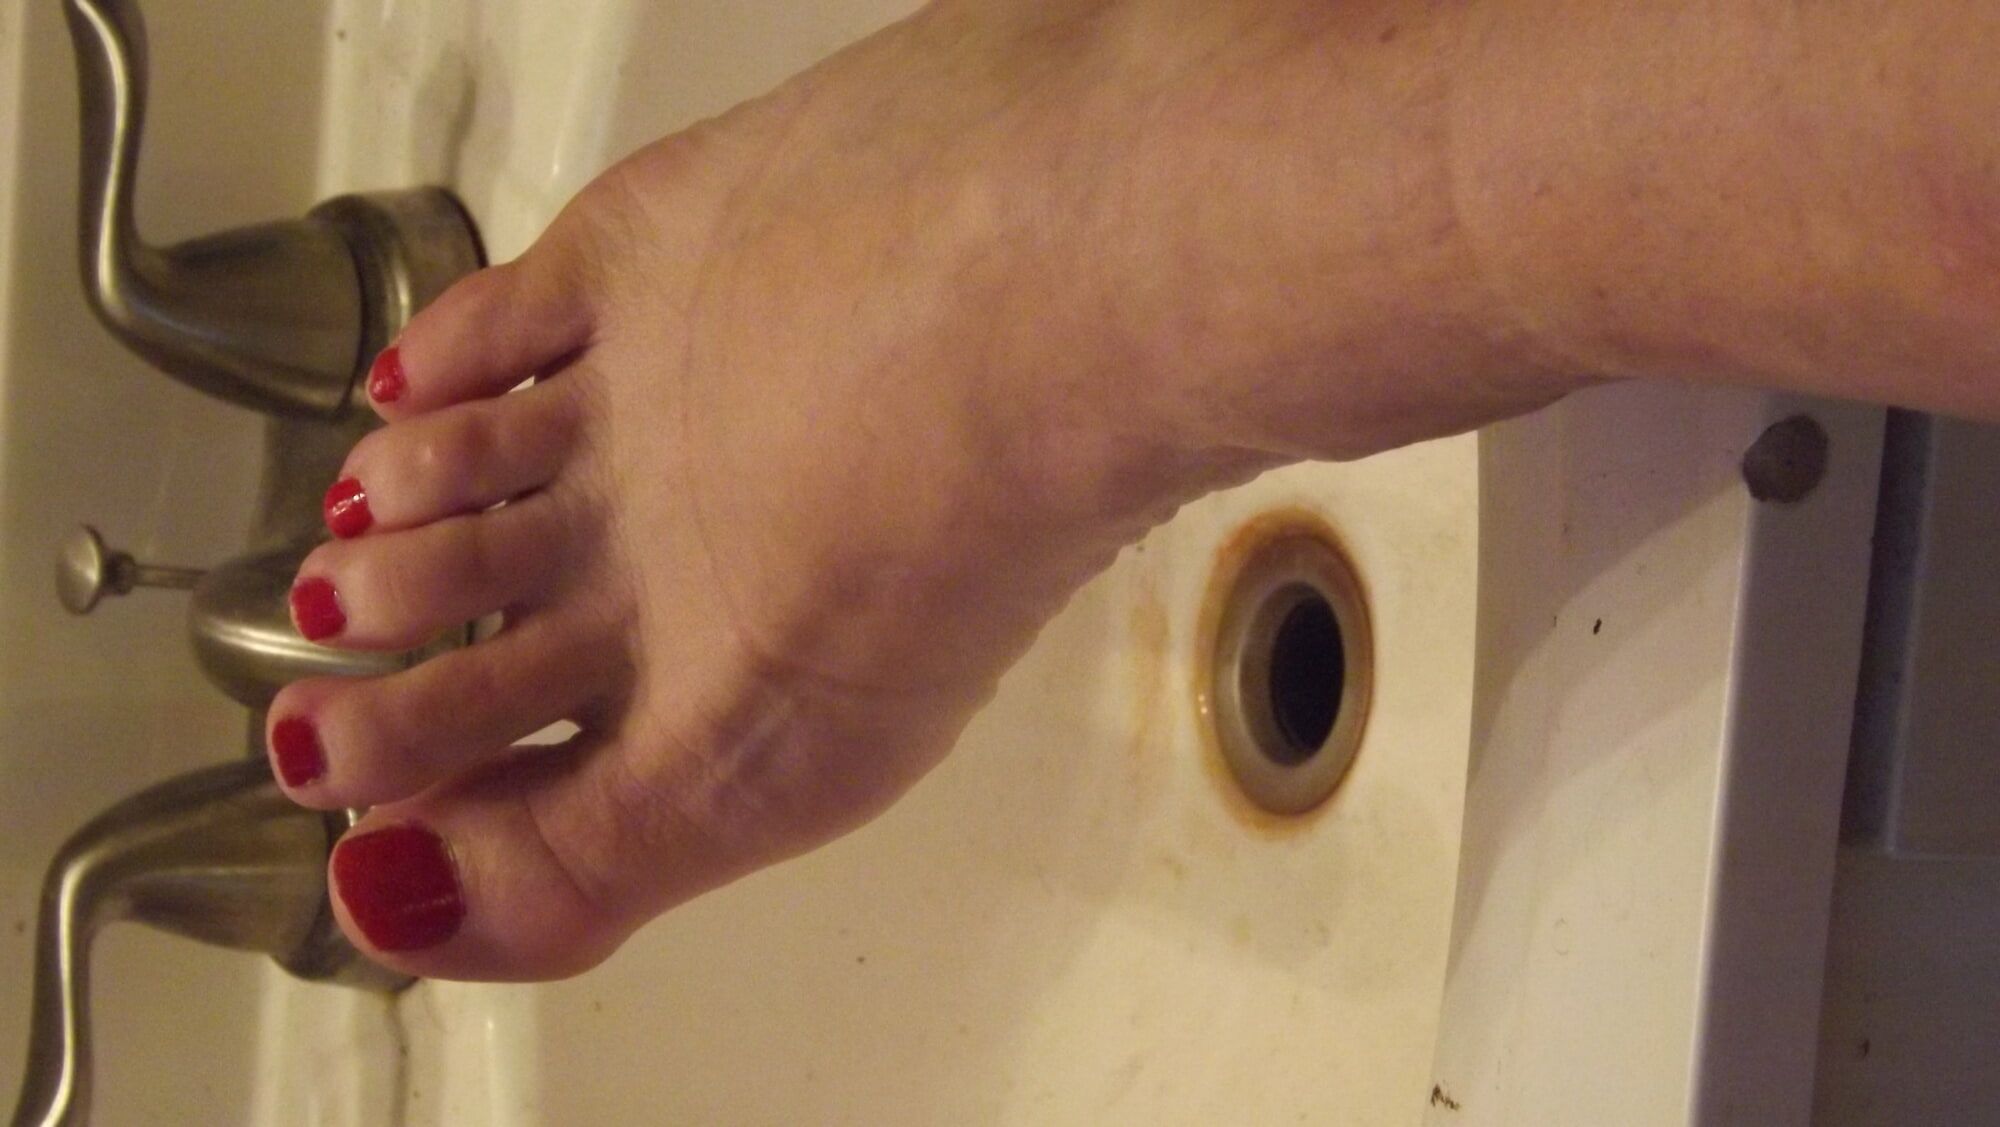 new pics of some man toes #3